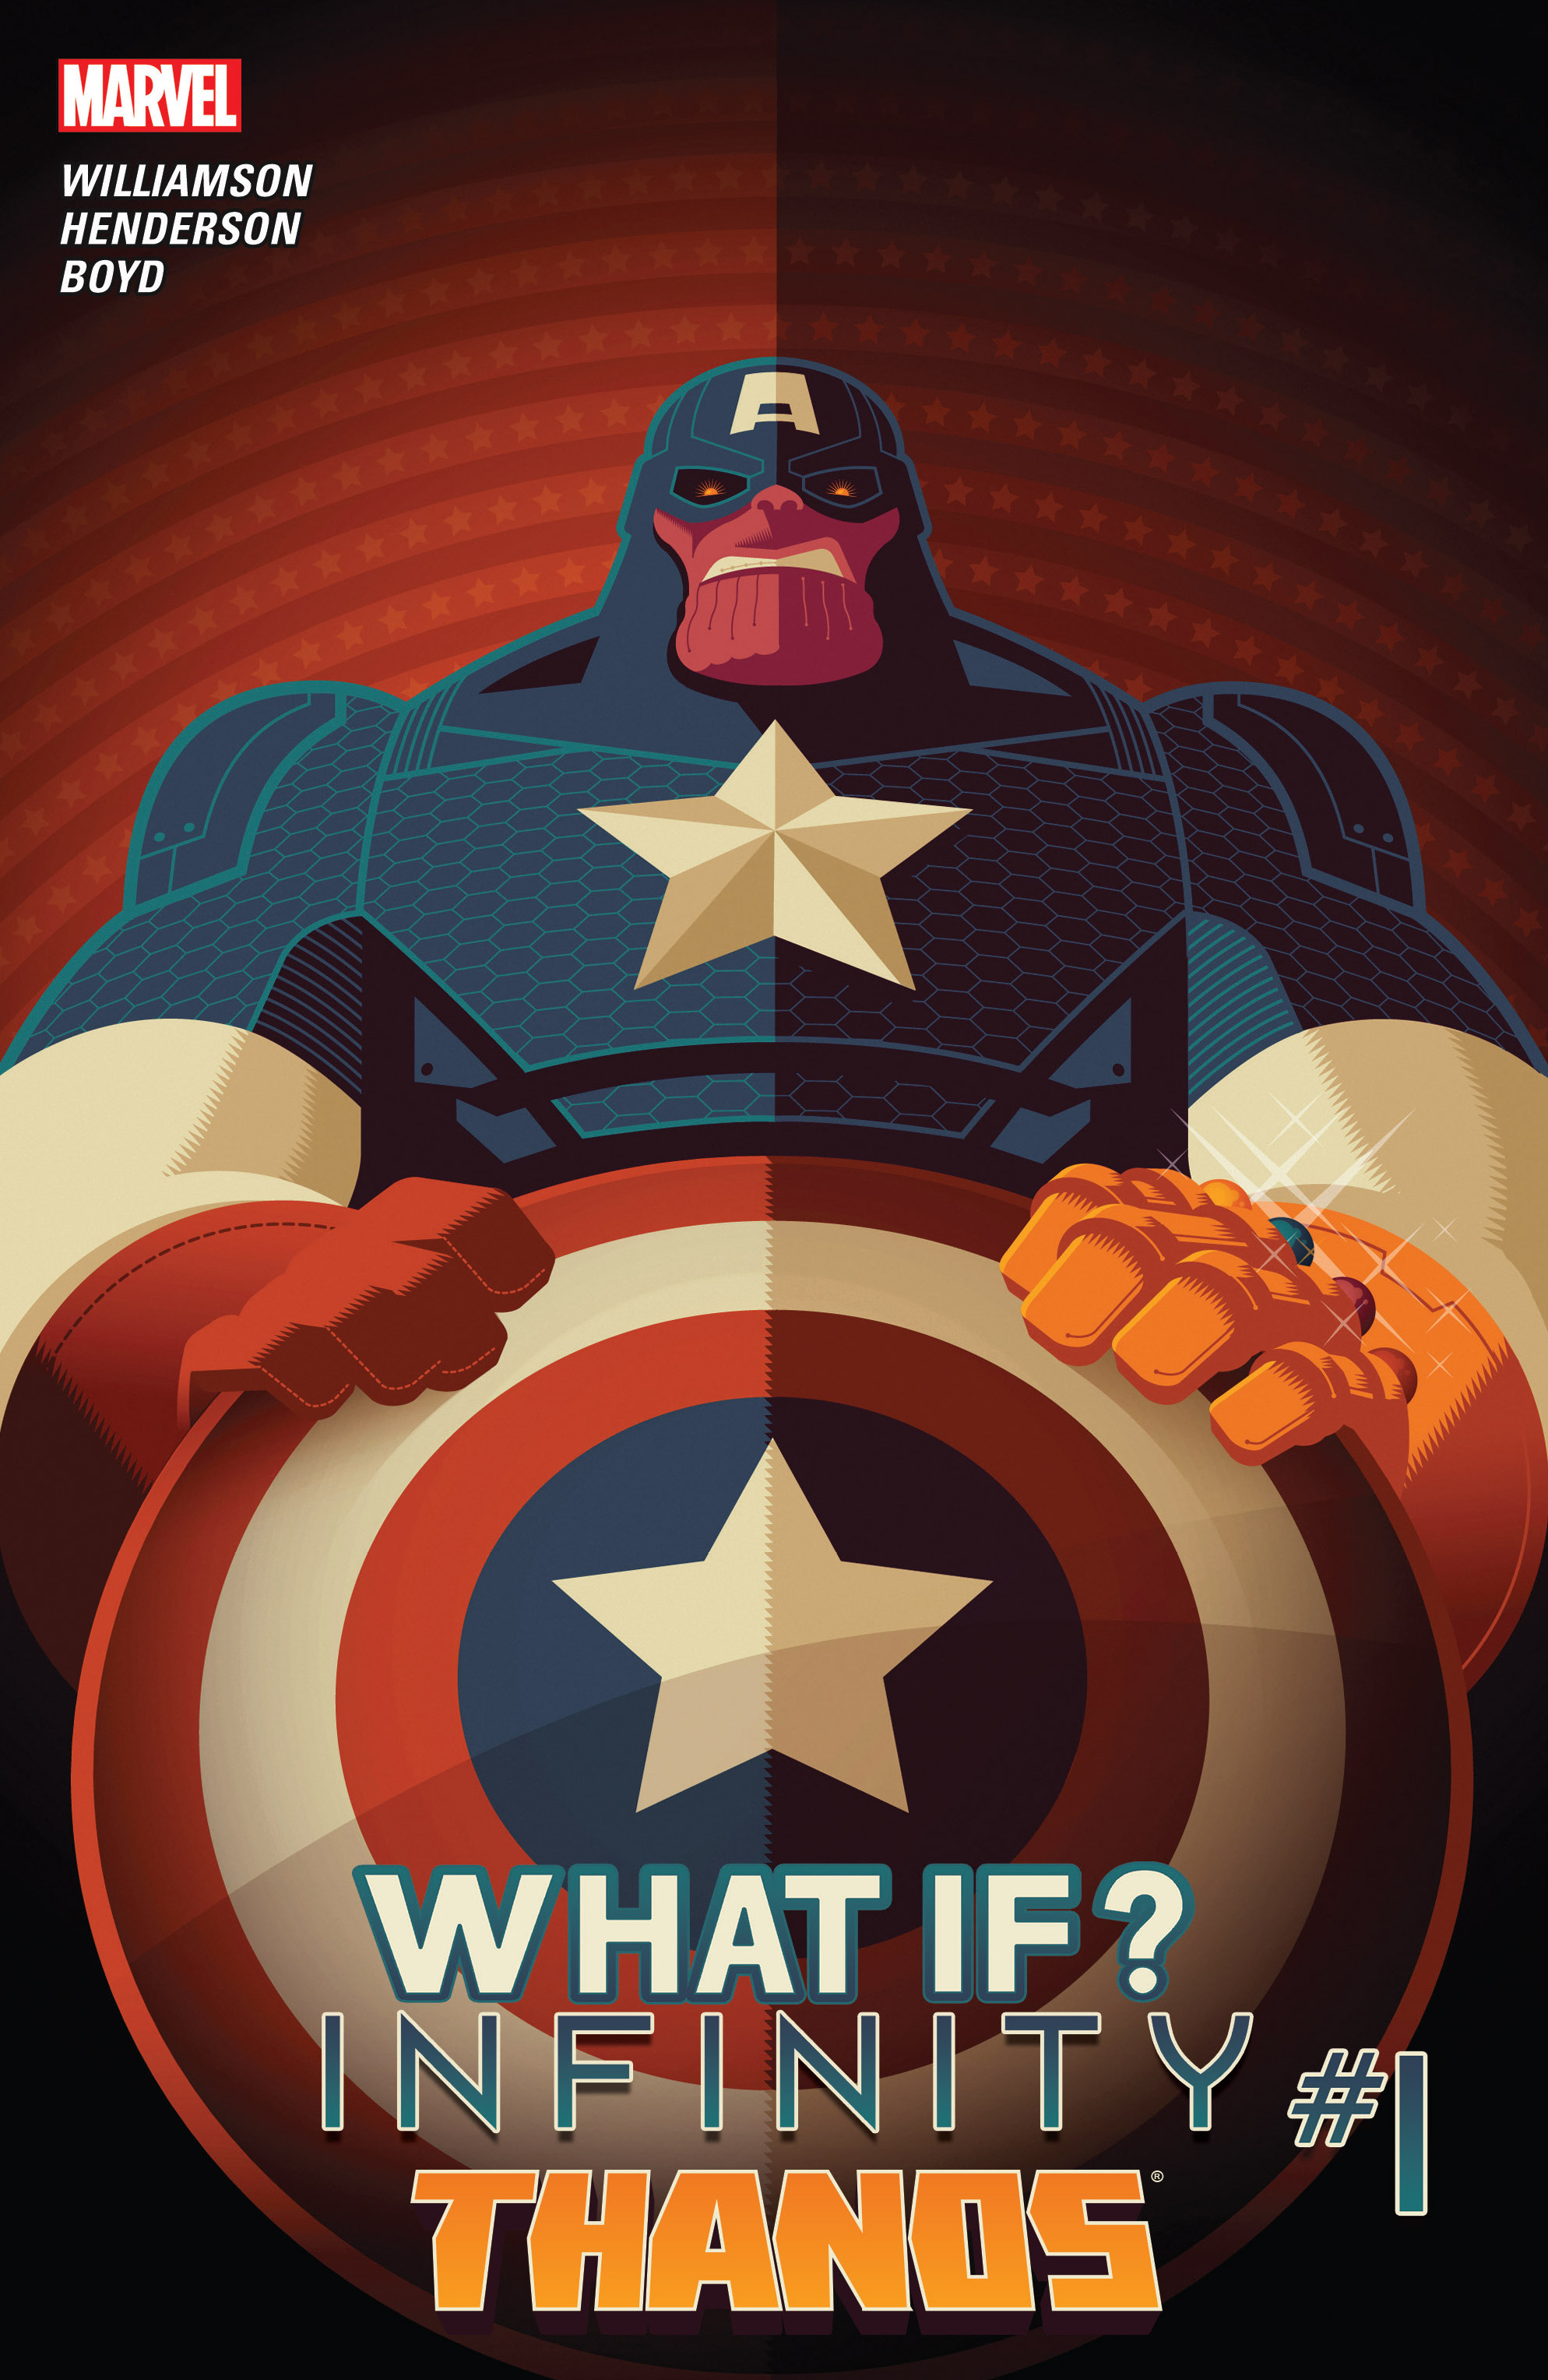 Read online What If? Infinity Thanos comic -  Issue # Full - 1